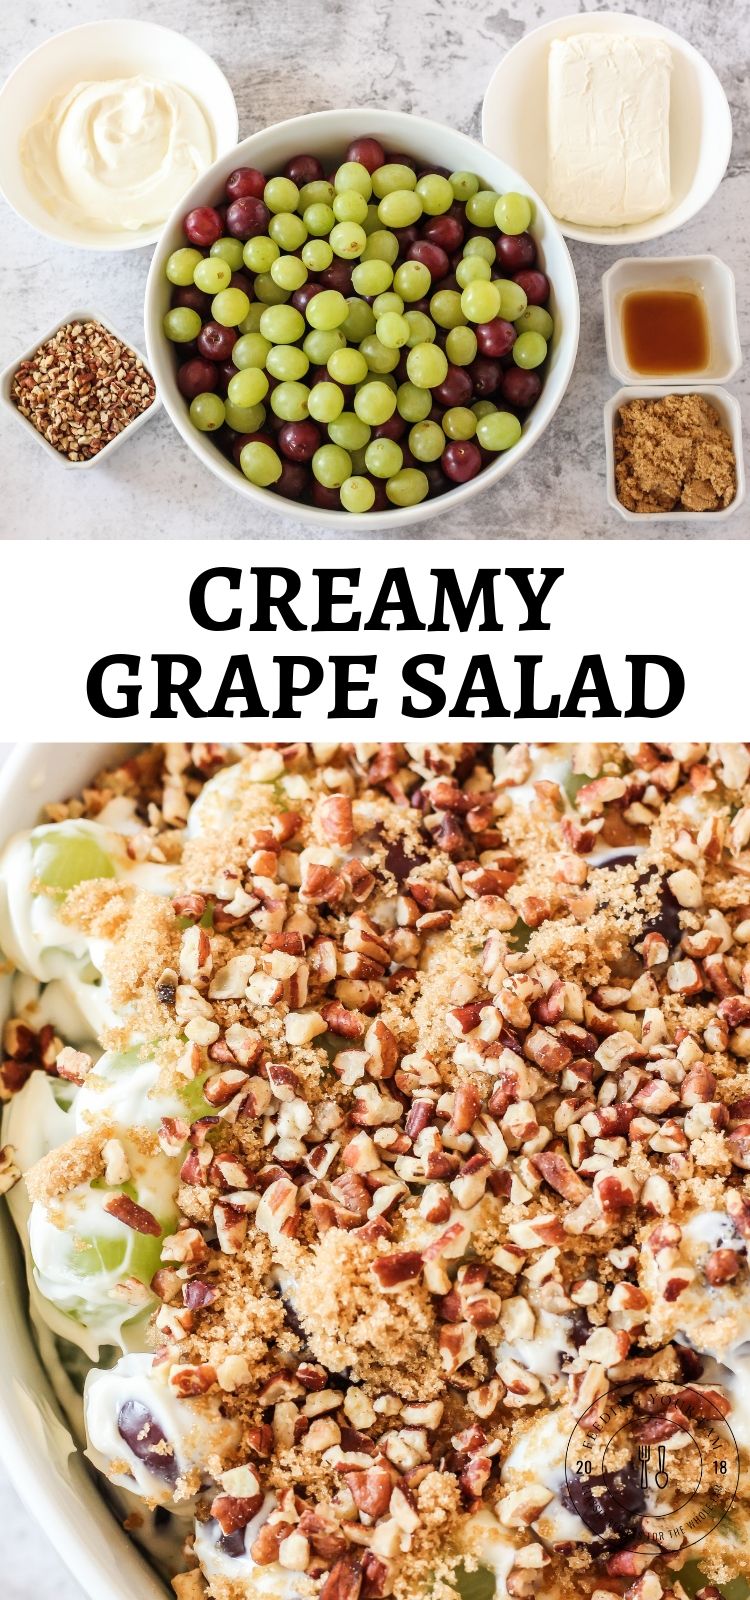 creamy grape salad ingredients and completed salad underneath with the words Creamy Grape Salad in the center